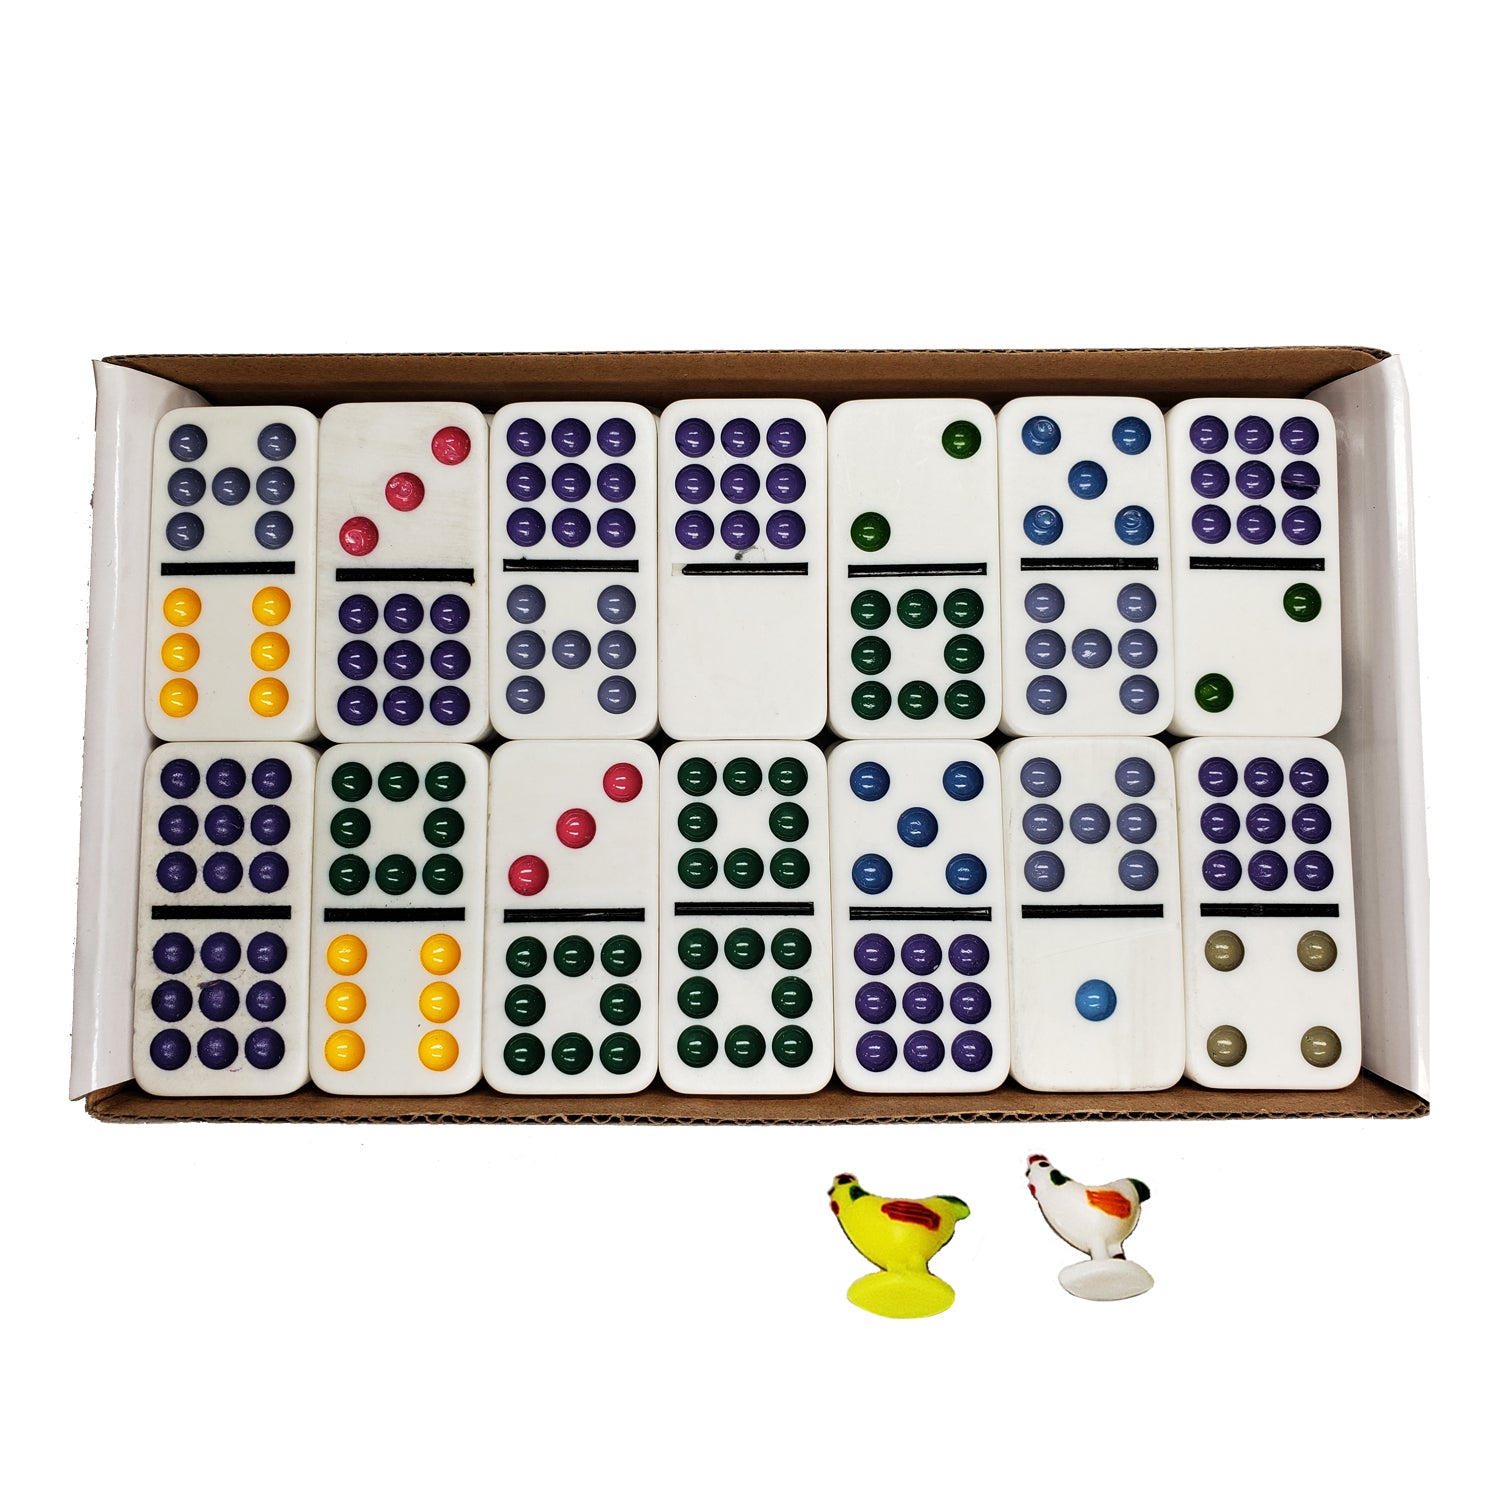 Professional Double-9 Chicken Domino Set with a centerpiece and two chicken markers | COLOR DOTS